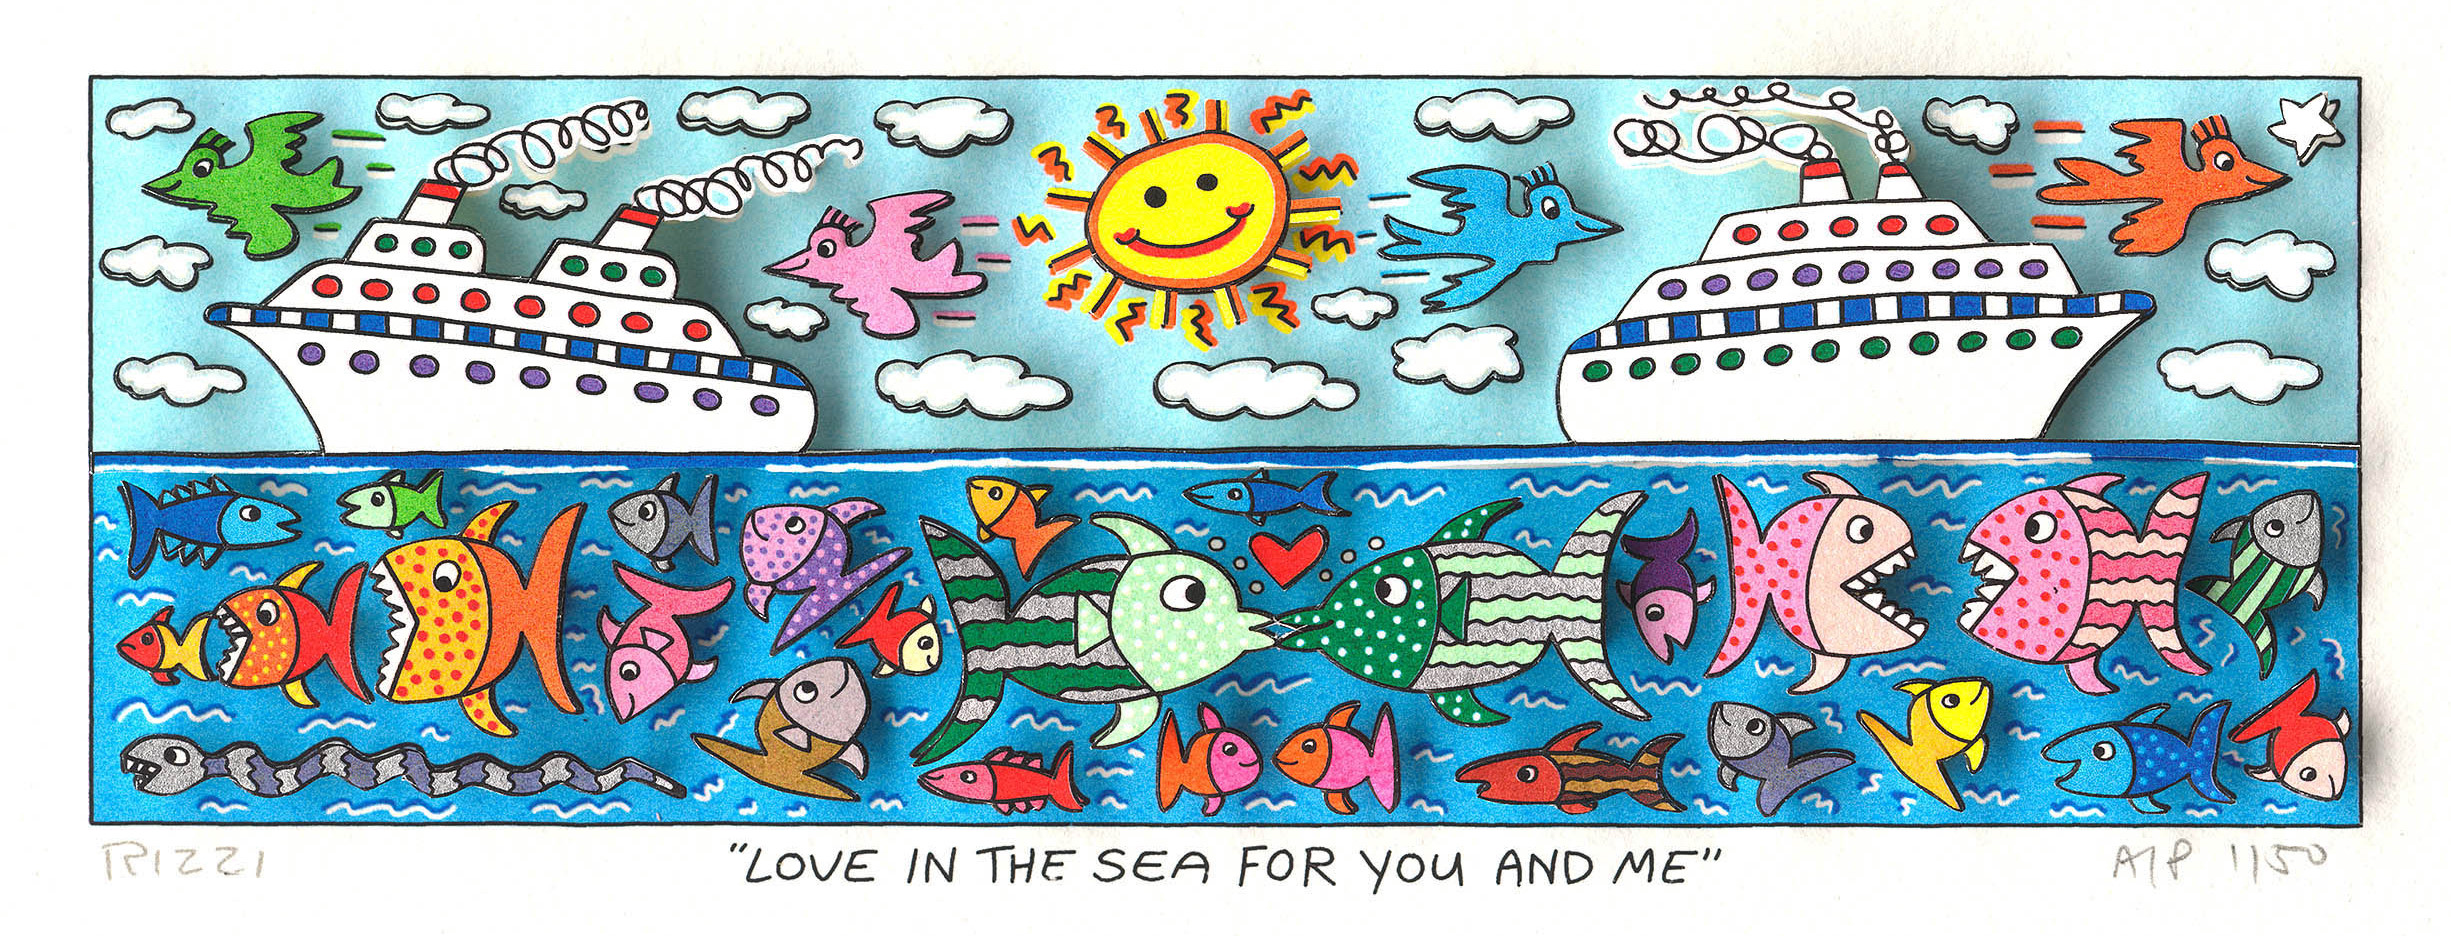 Love in the Sea For You and Me